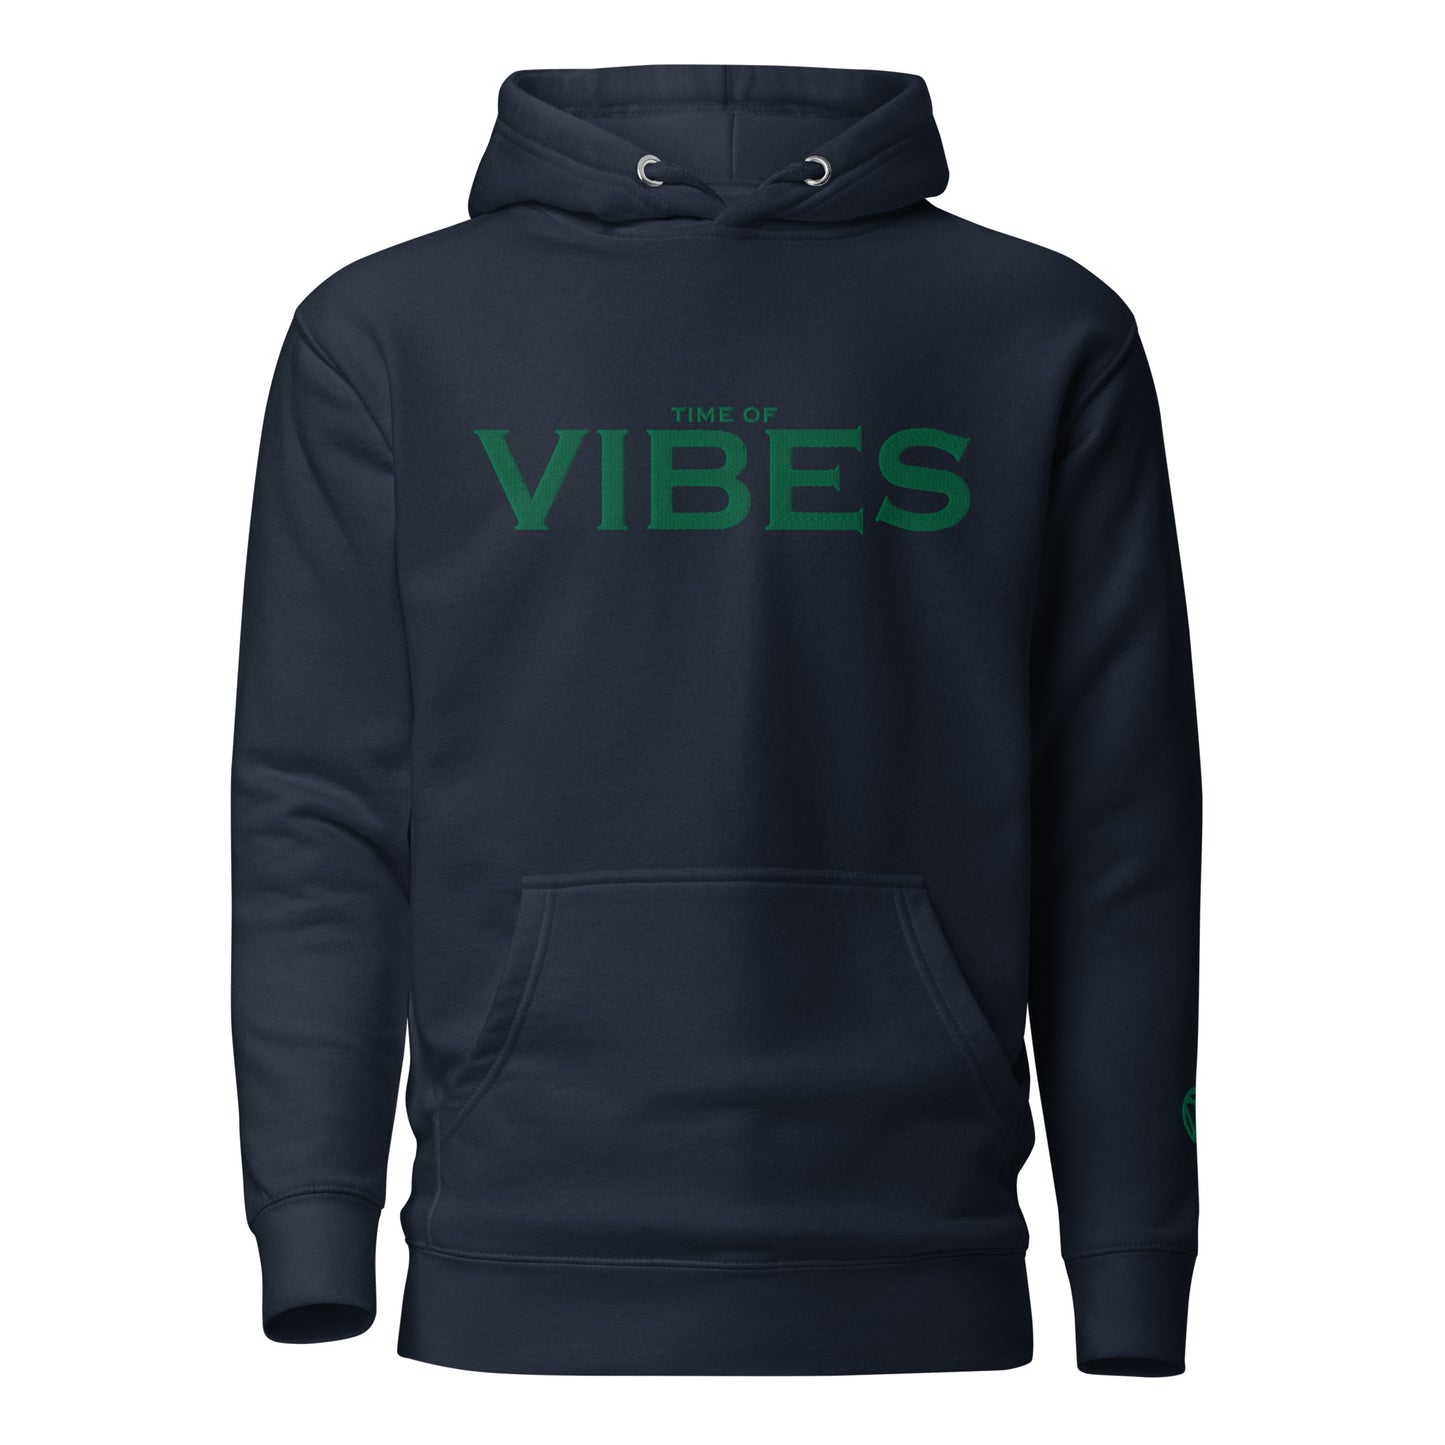 TIME OF VIBES - Classic Hoodie VIBES (Navy/Green) - €69.00